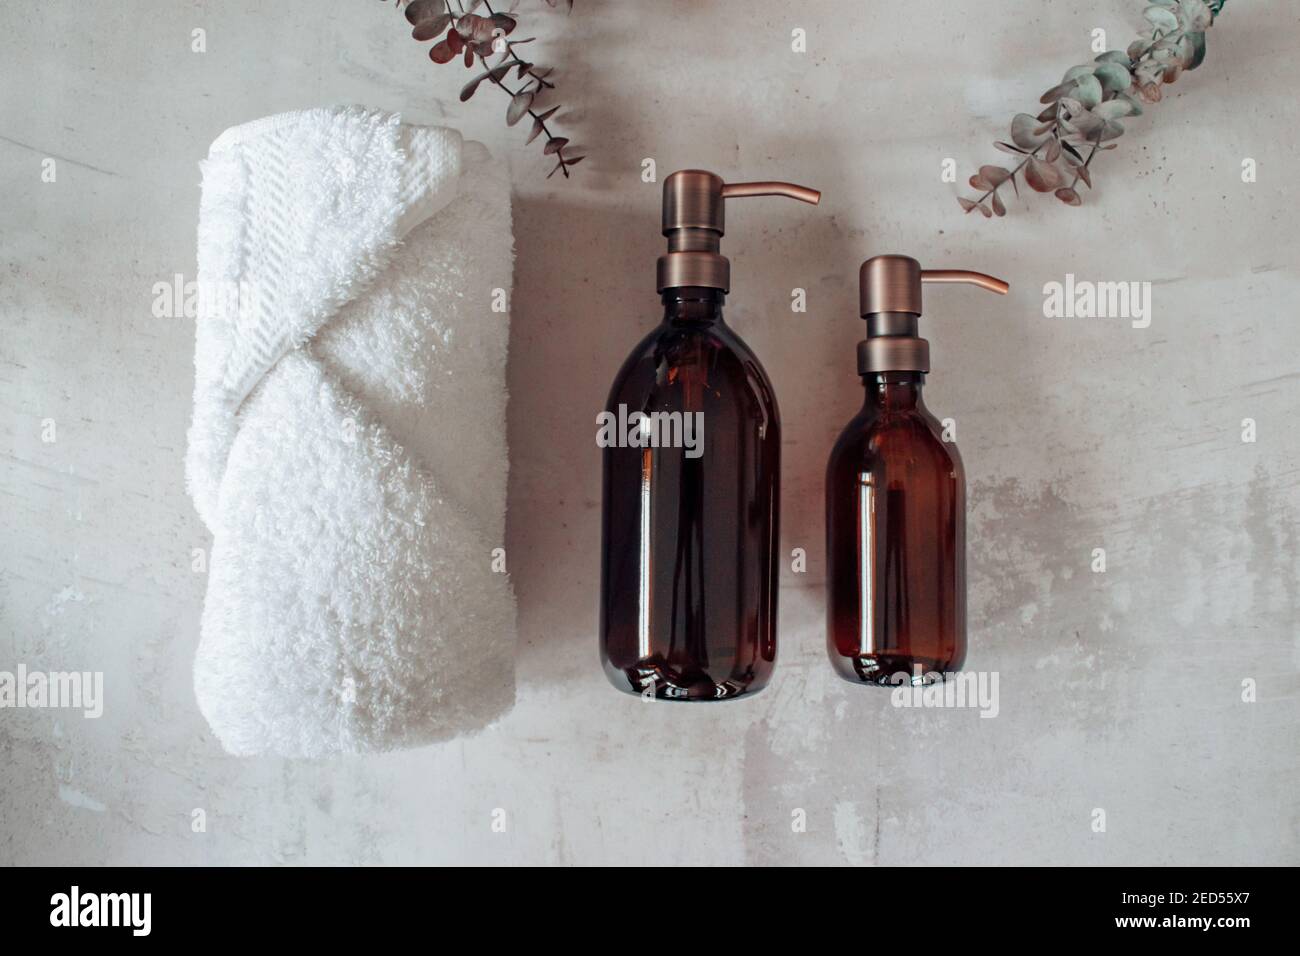 Amber glass shampoo or soap bottle dispenser with a copper steel pump against a stone background. Spa towel with eucalyptus. Stock Photo